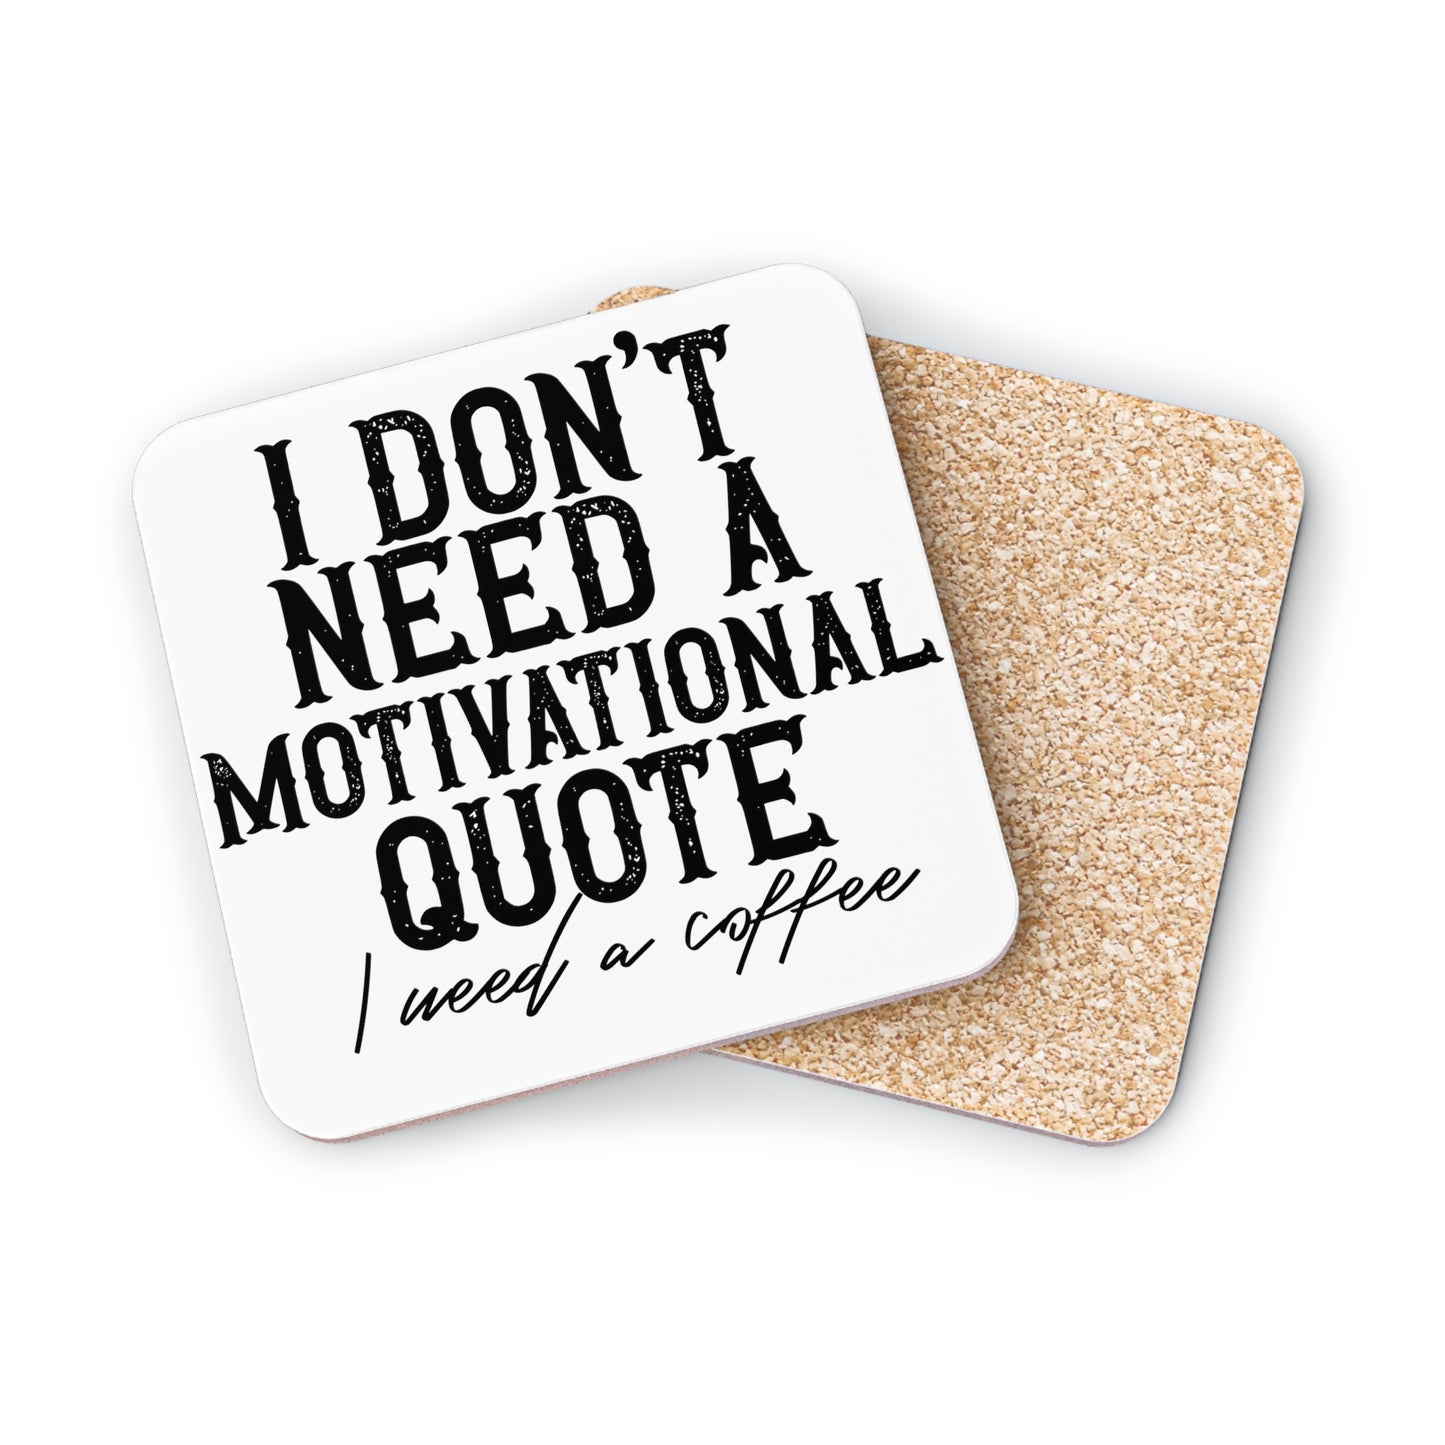 "I Don't Need A Motivational Quote. I Need A Coffee" Square Coasters